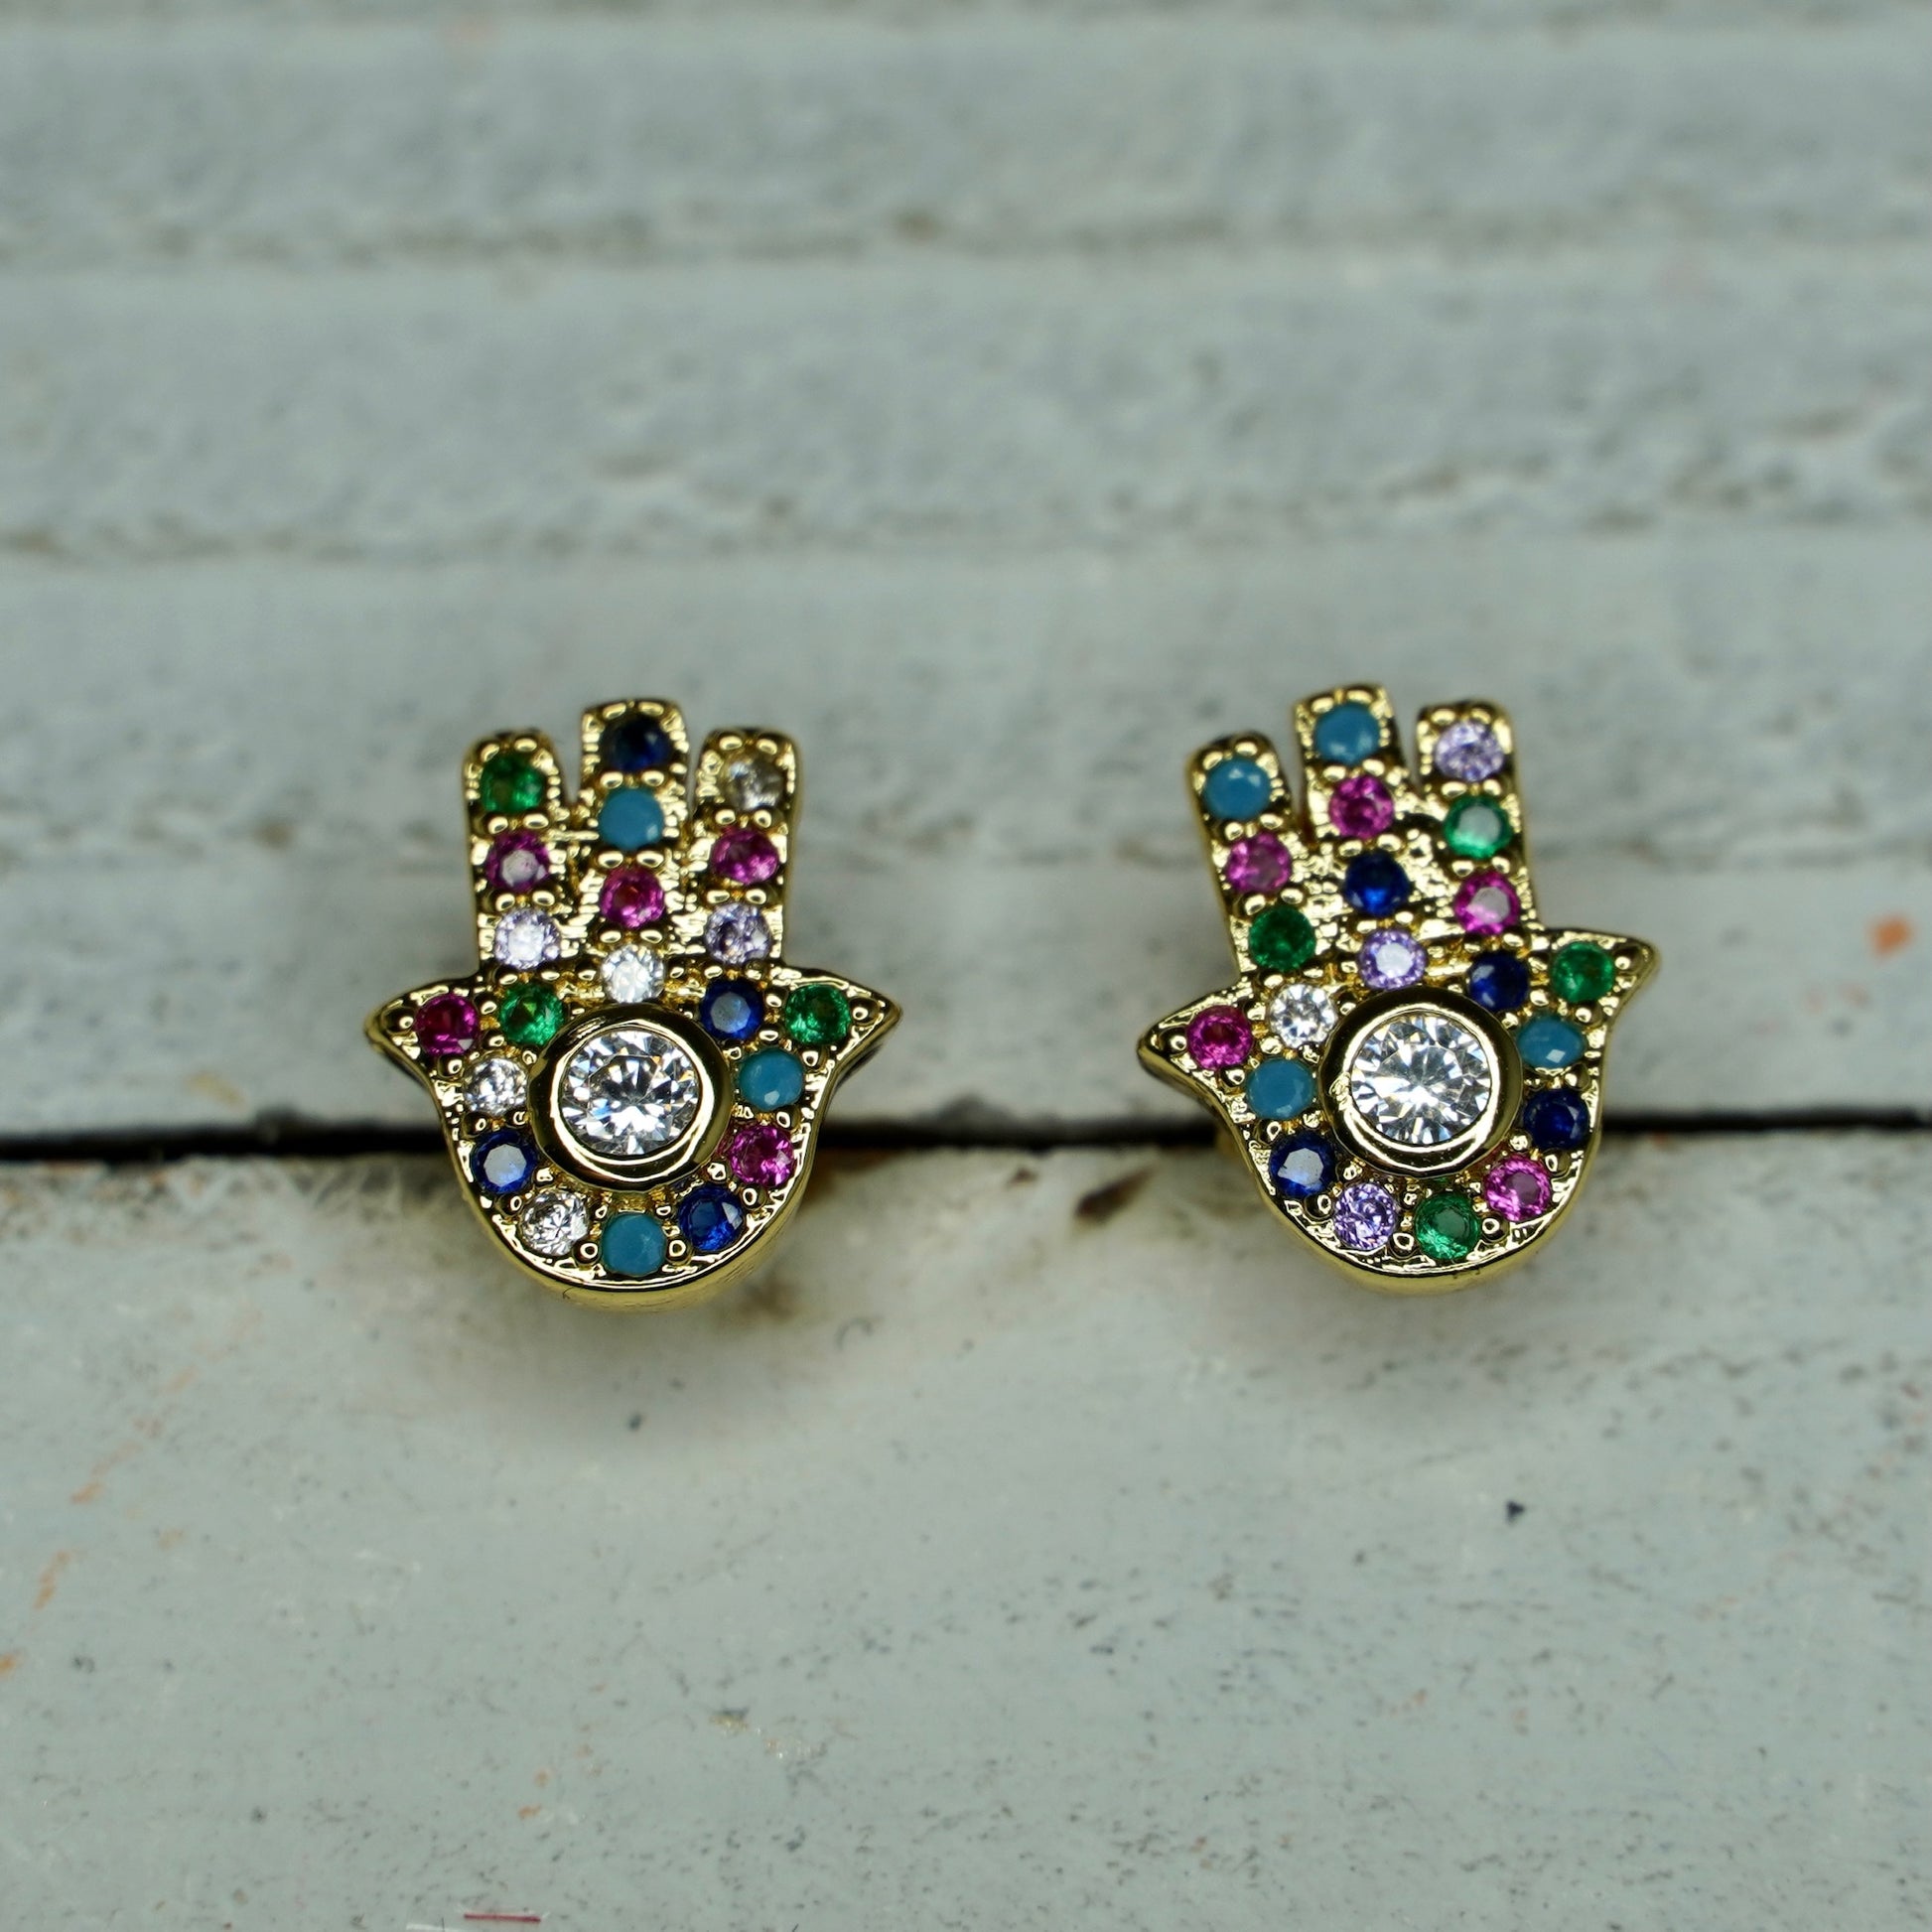 Gold Plated Hamsa Shape Earrings with Small Multicolored Pave and Crystals in Stud